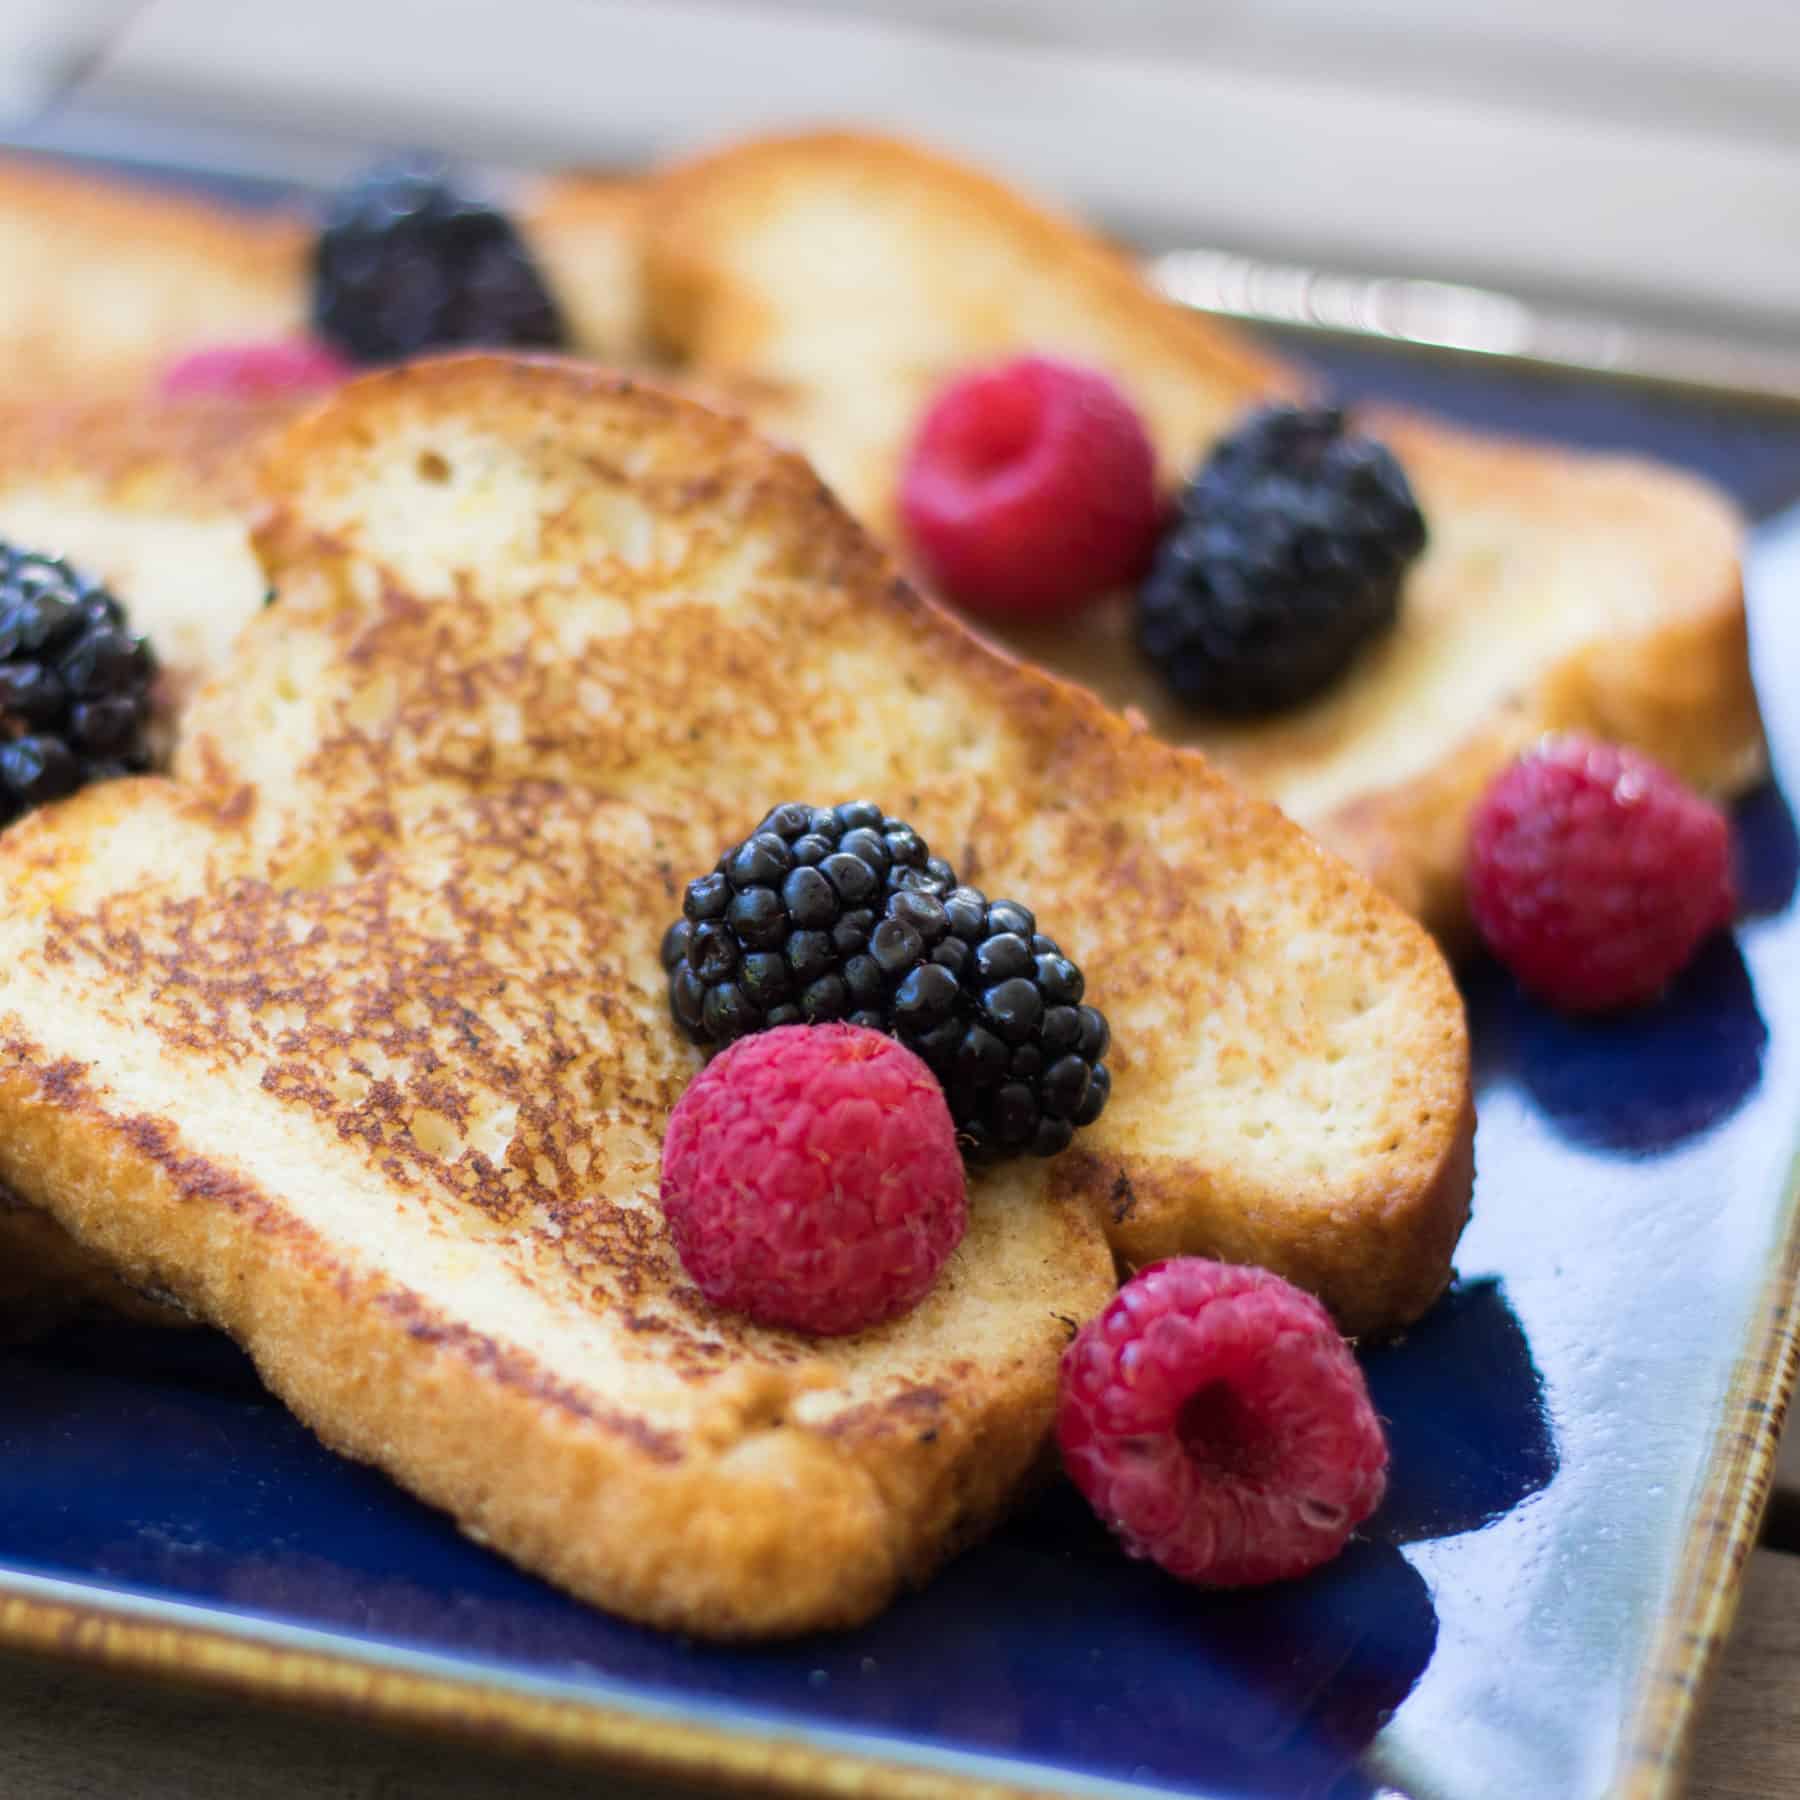 gluten-free french toast with berries